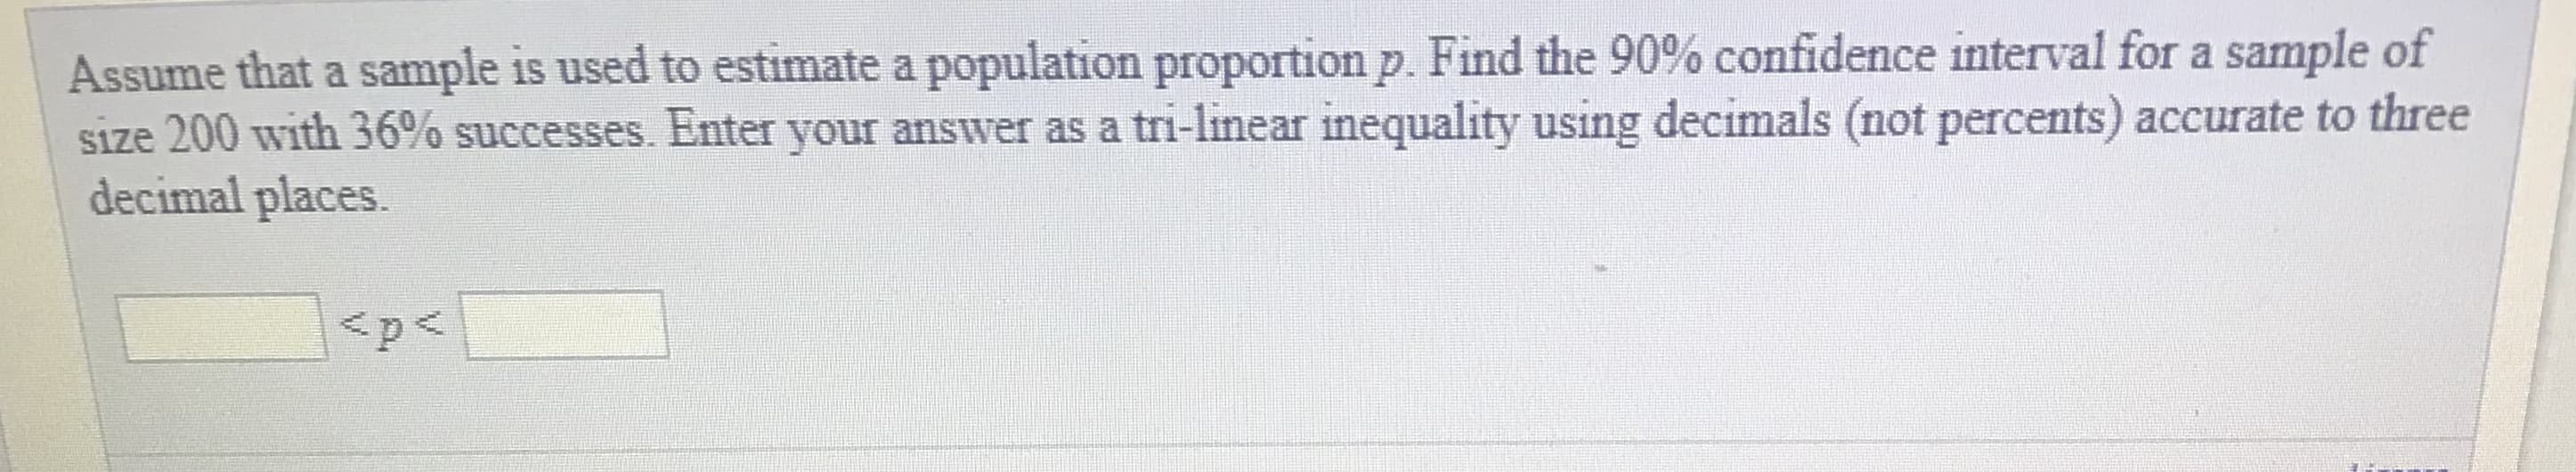 Assume that a sample is used to estimate a population proportion p. Find the 90% confidence interval for a sample of
size 200 with 36% successes. Enter your answer as a tri-linear inequality using decimals (not percents) accurate to three
decimal places.
